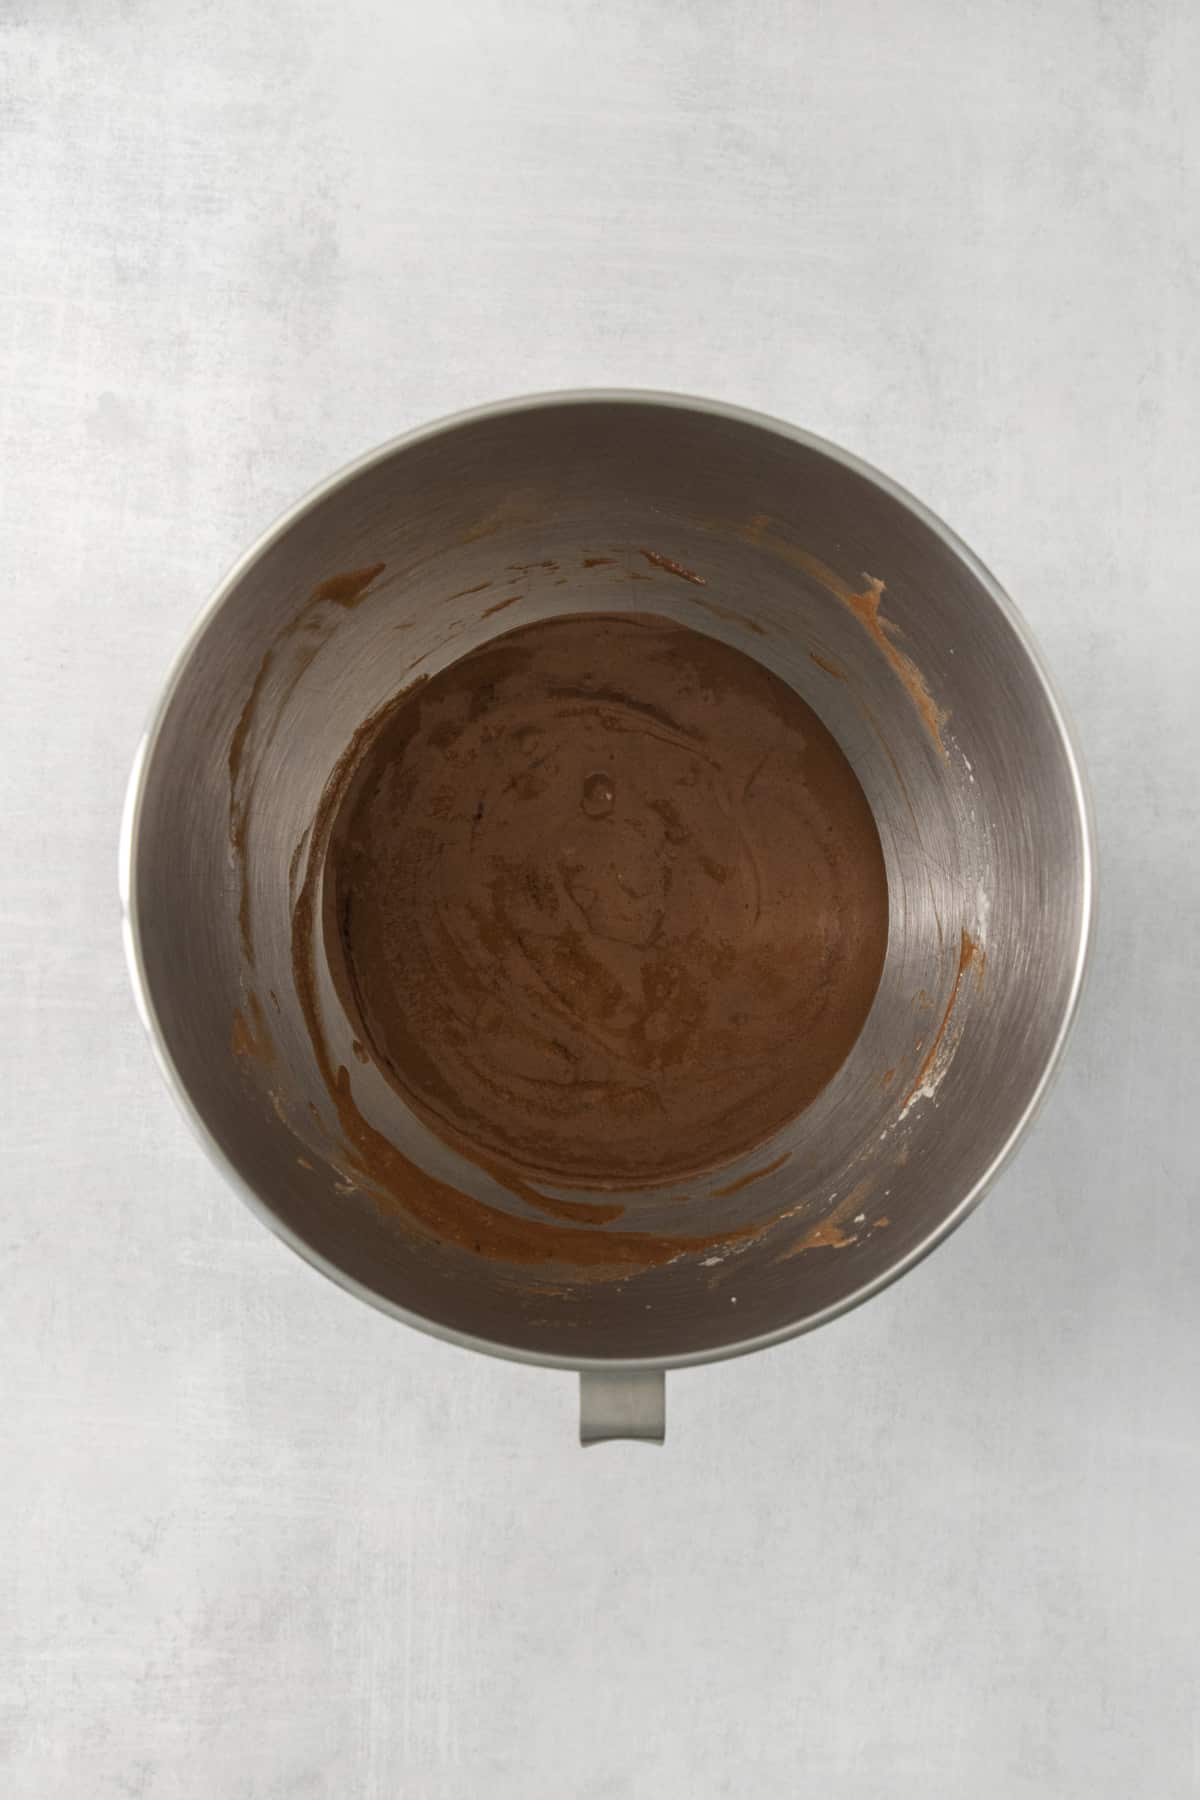 a mixing bowl with mousse from above.